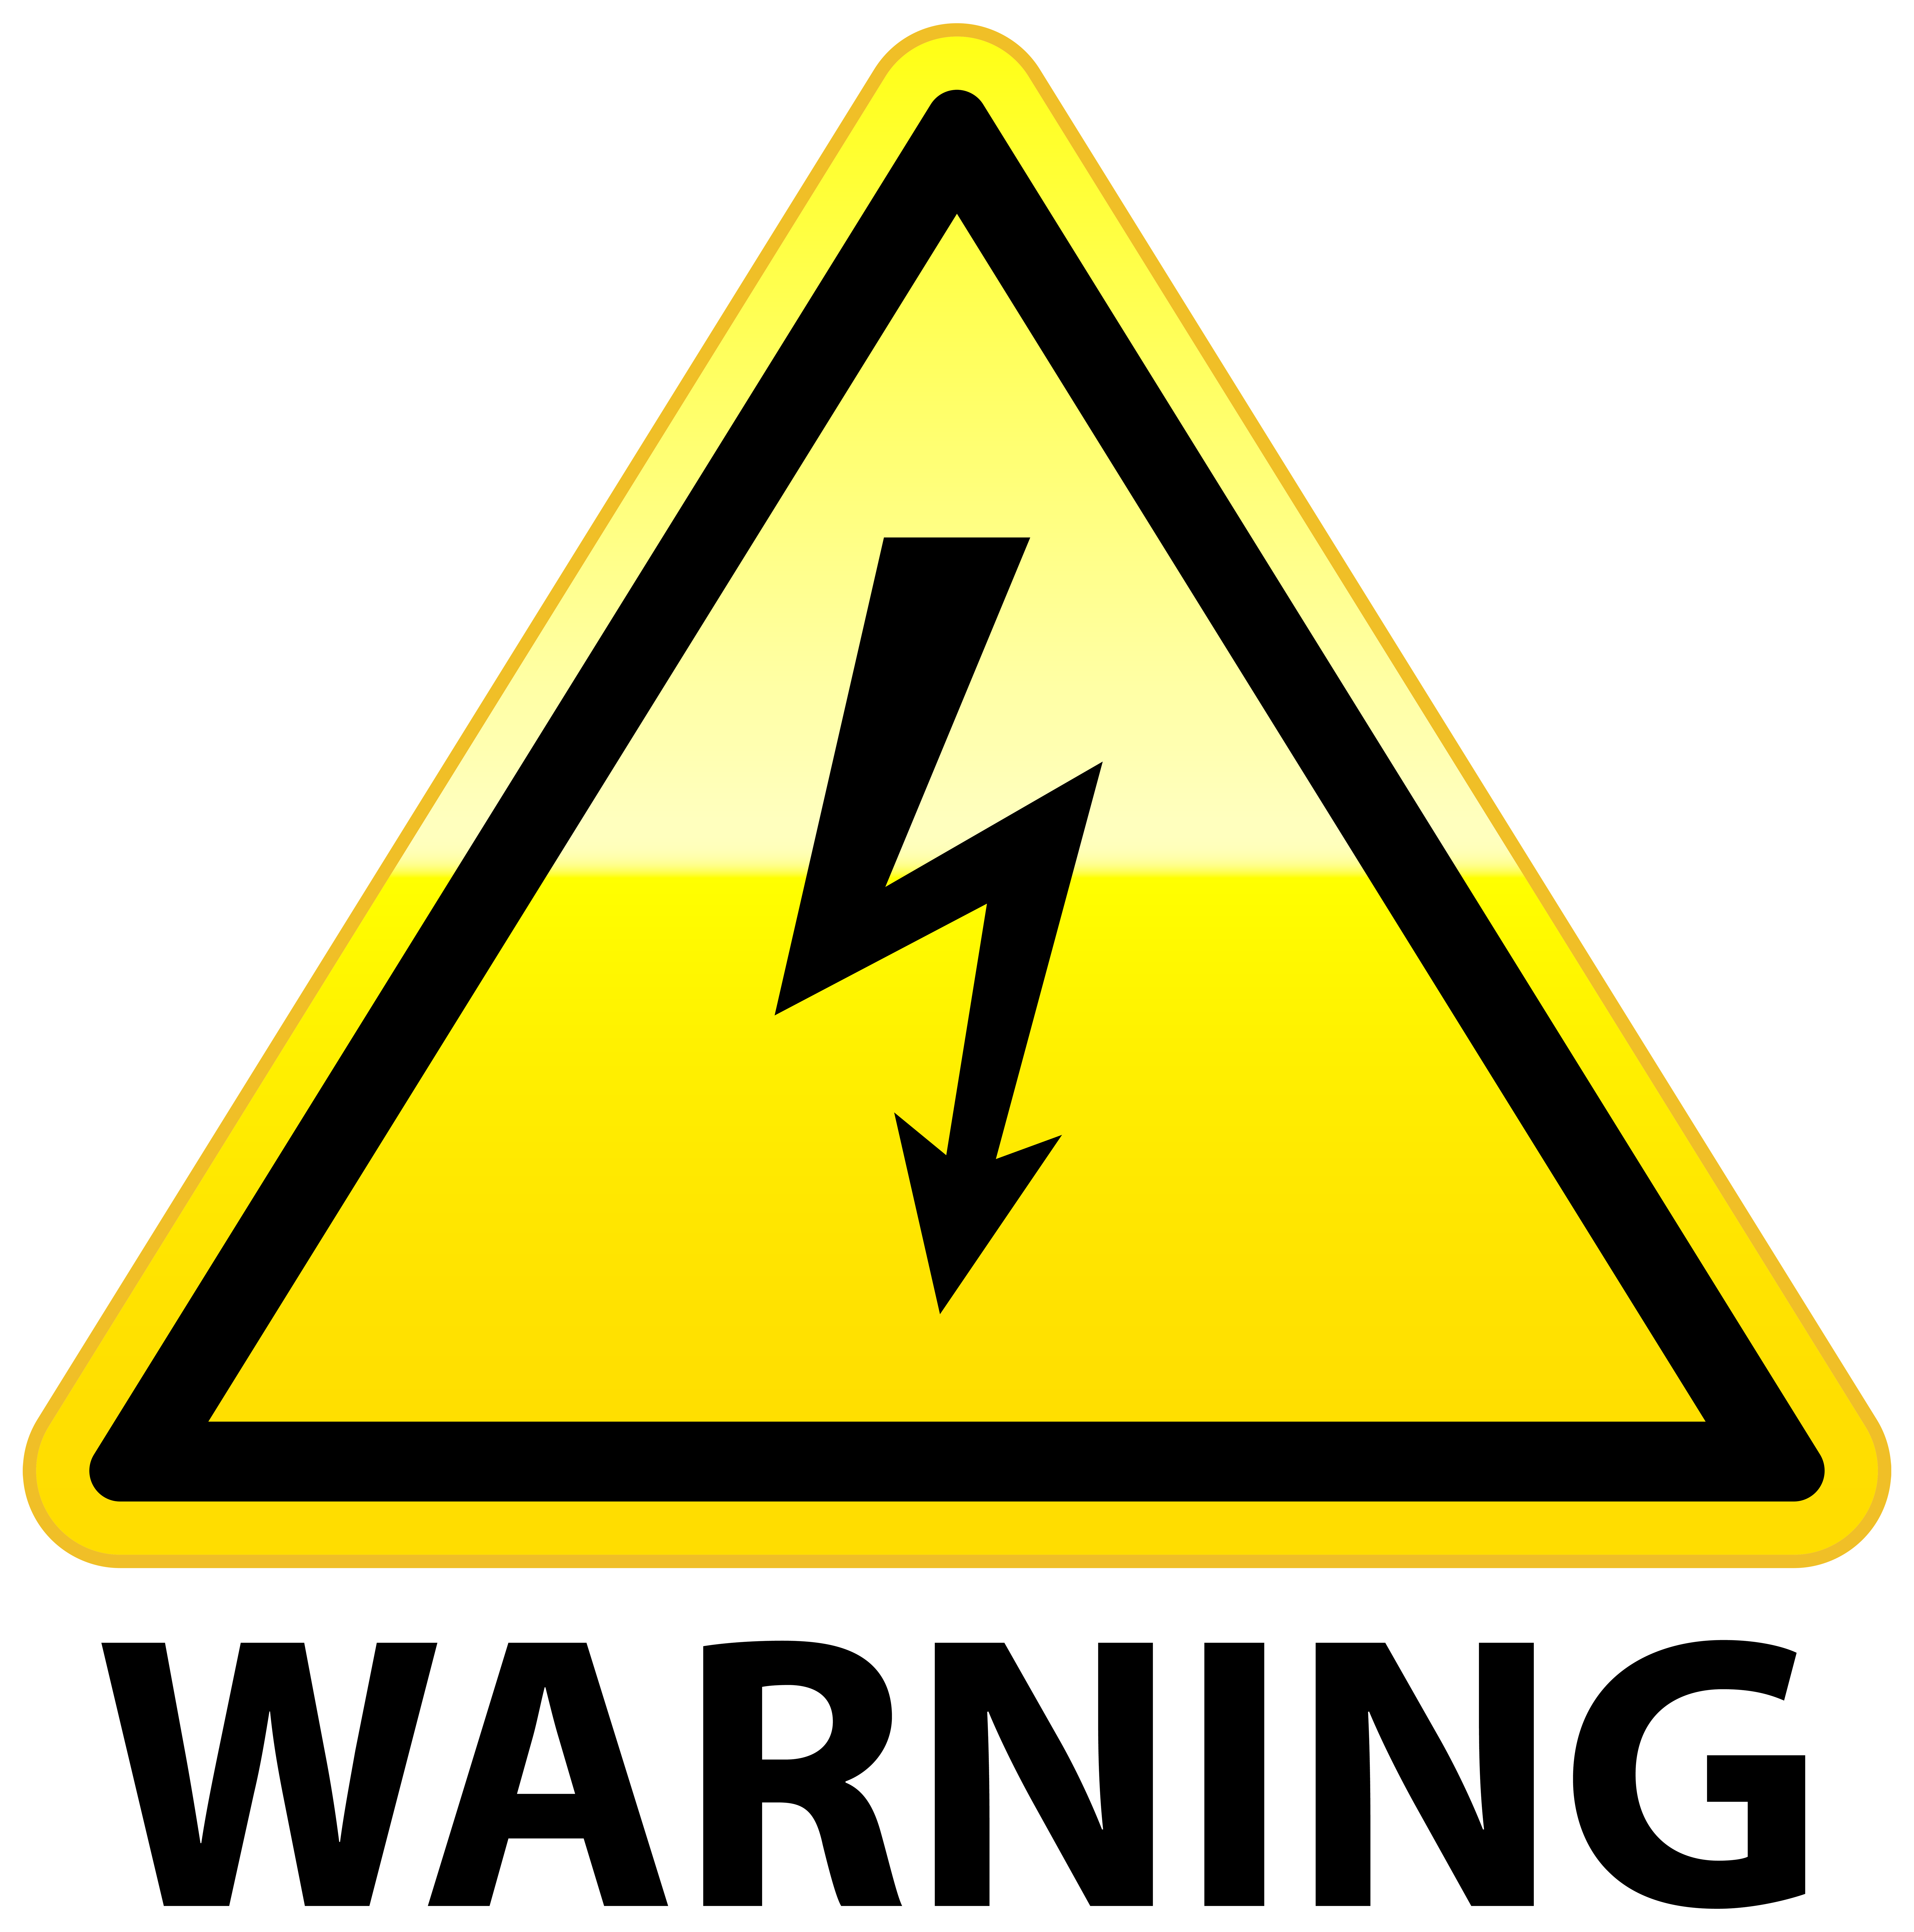 electrical clipart electrical engineering